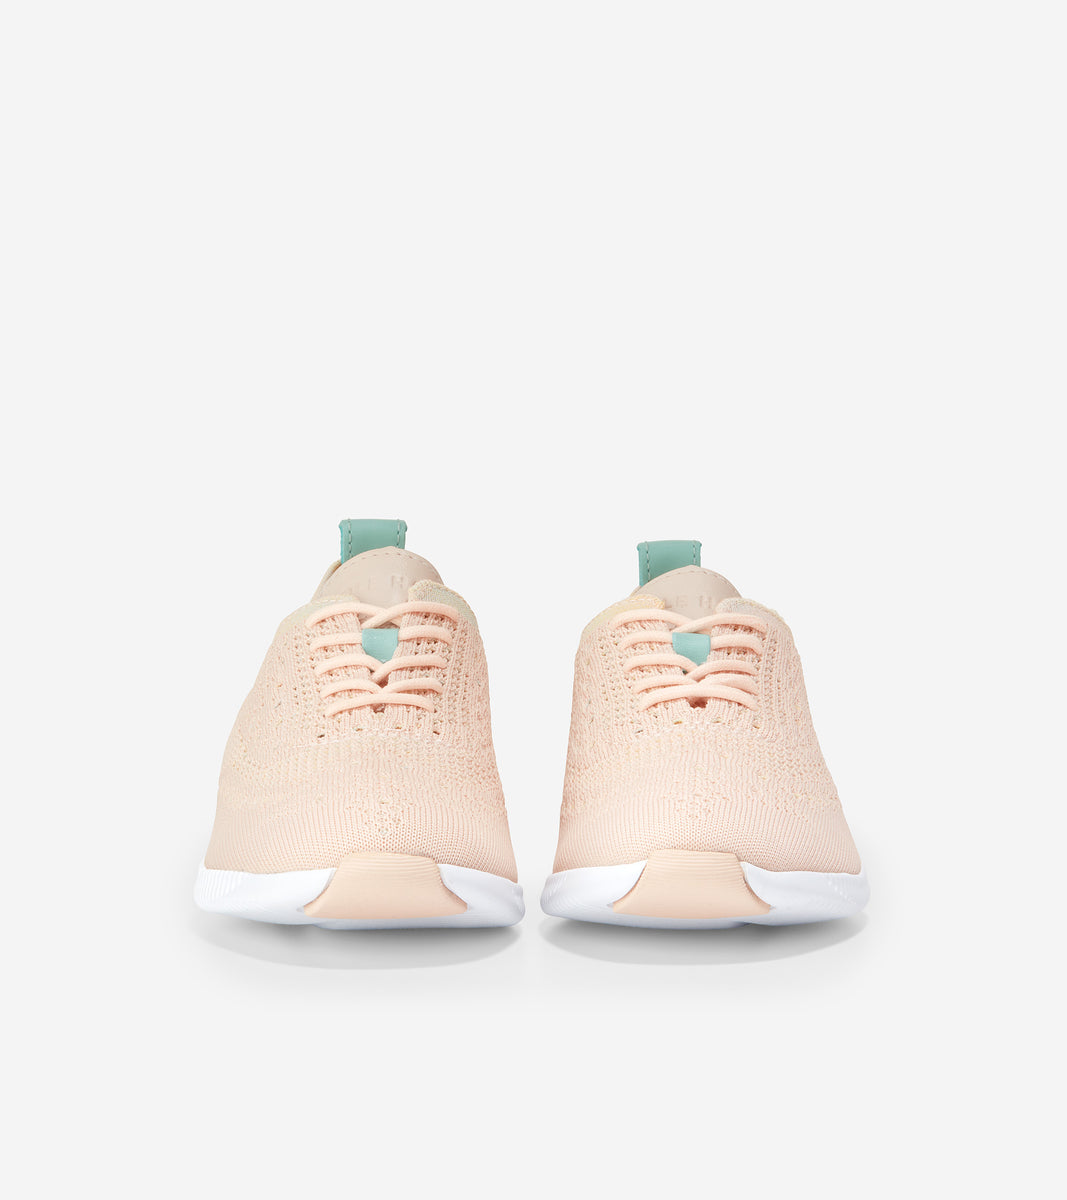 ColeHaan-2.Zerogrand Stitchlite Oxford-w22850-CLAY PINK & MULTI OMBRE / BLUE TINT PATENT / OPTIC WHITE MIDSOLE / CLAY PINK RBR PODS